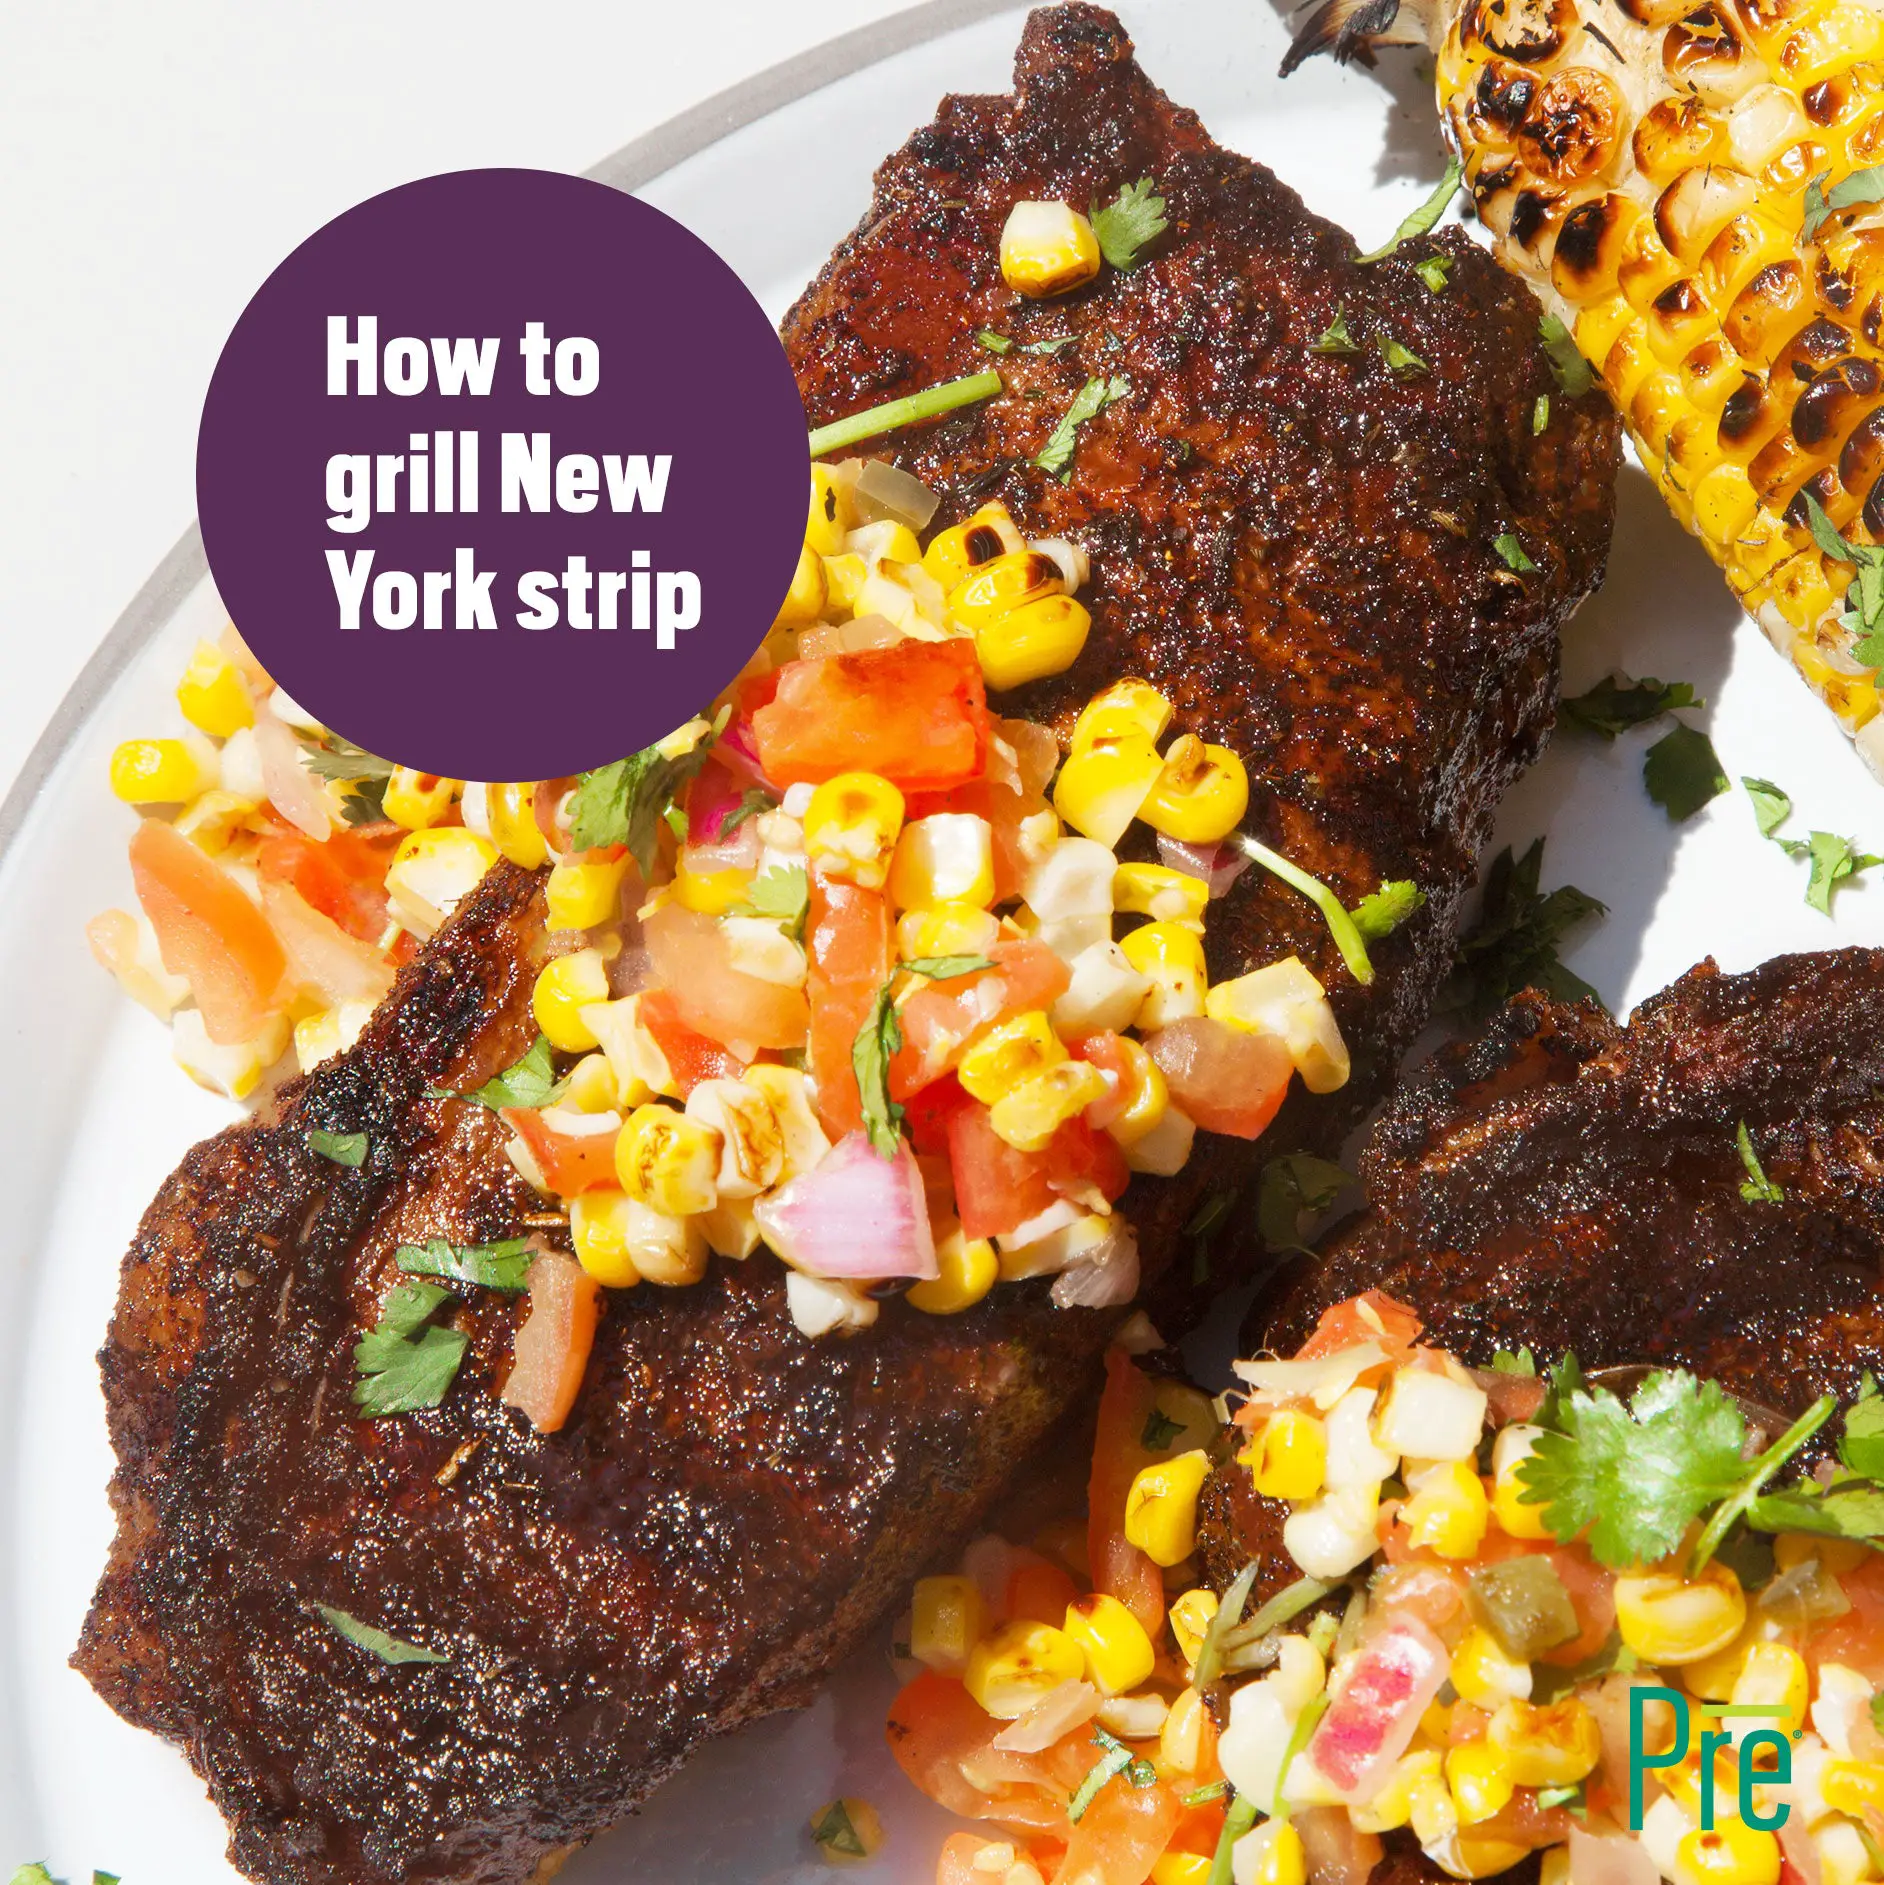 How to Grill New York Strip Steak